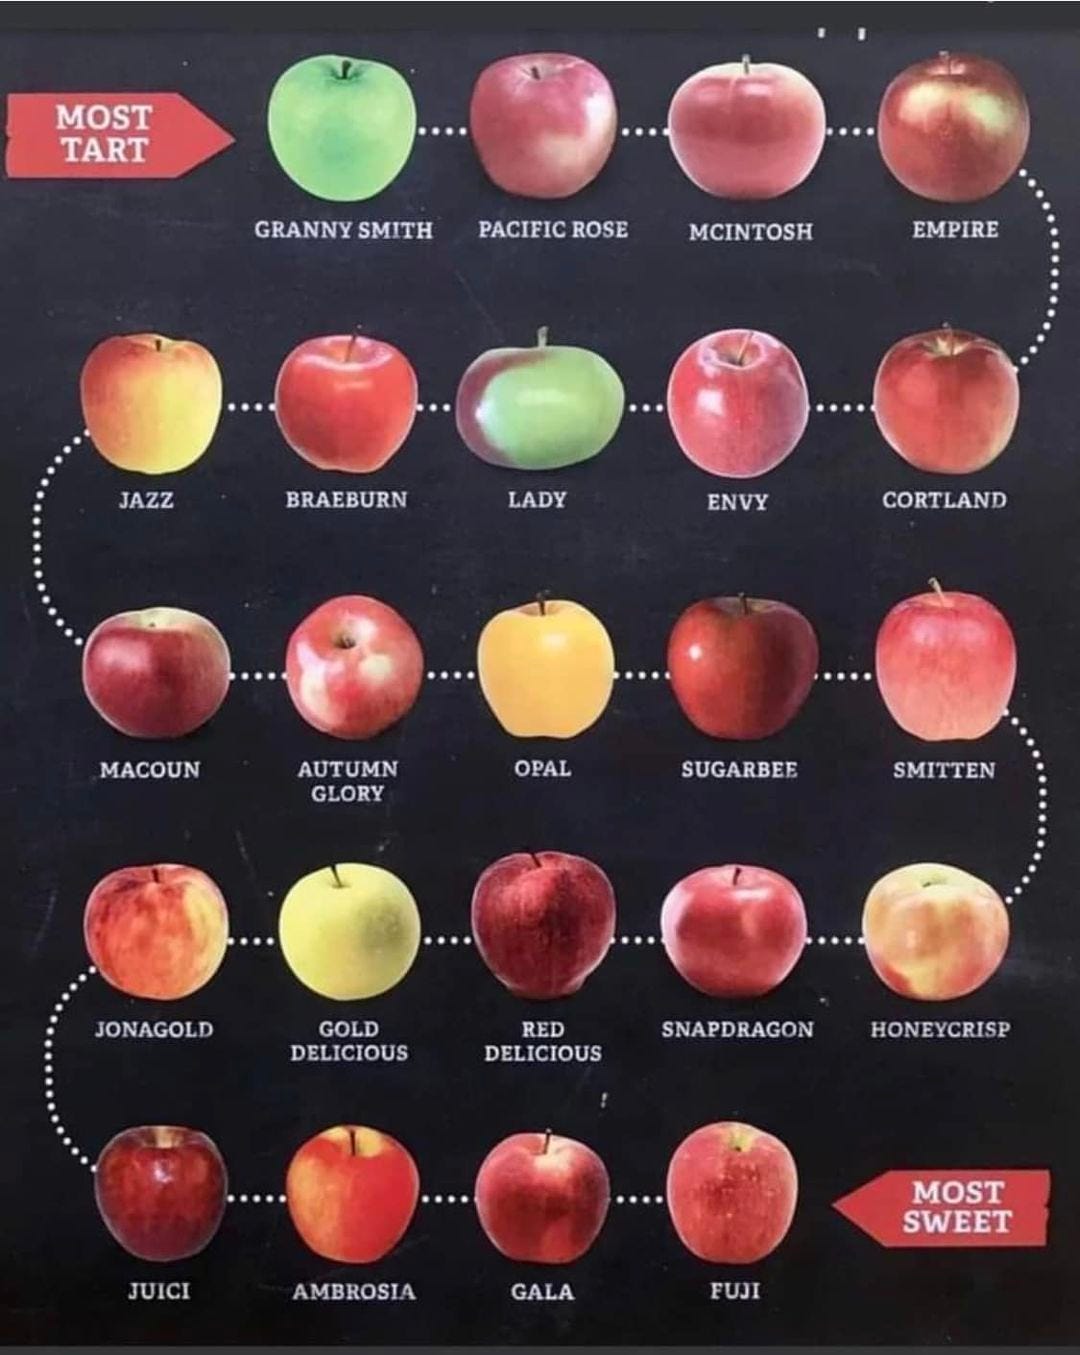 May be an image of apple and text that says 'MOST TART GRAYSITH GRANNY SMITH PACIFIC ROSE MCINTOSH EMPIRE JAZZ BRAEBURN LADY ENVY CORTLAND MACOUN ÛUTUMN GLORY OPAL SUGARBEE SMITTEN JONAGOLD GOLD DELICIOUS RED DELICIOUS SNAPDRAGON HONEYCRISP JUICI AMBROSIA GALA MOST SWEET FUJI'